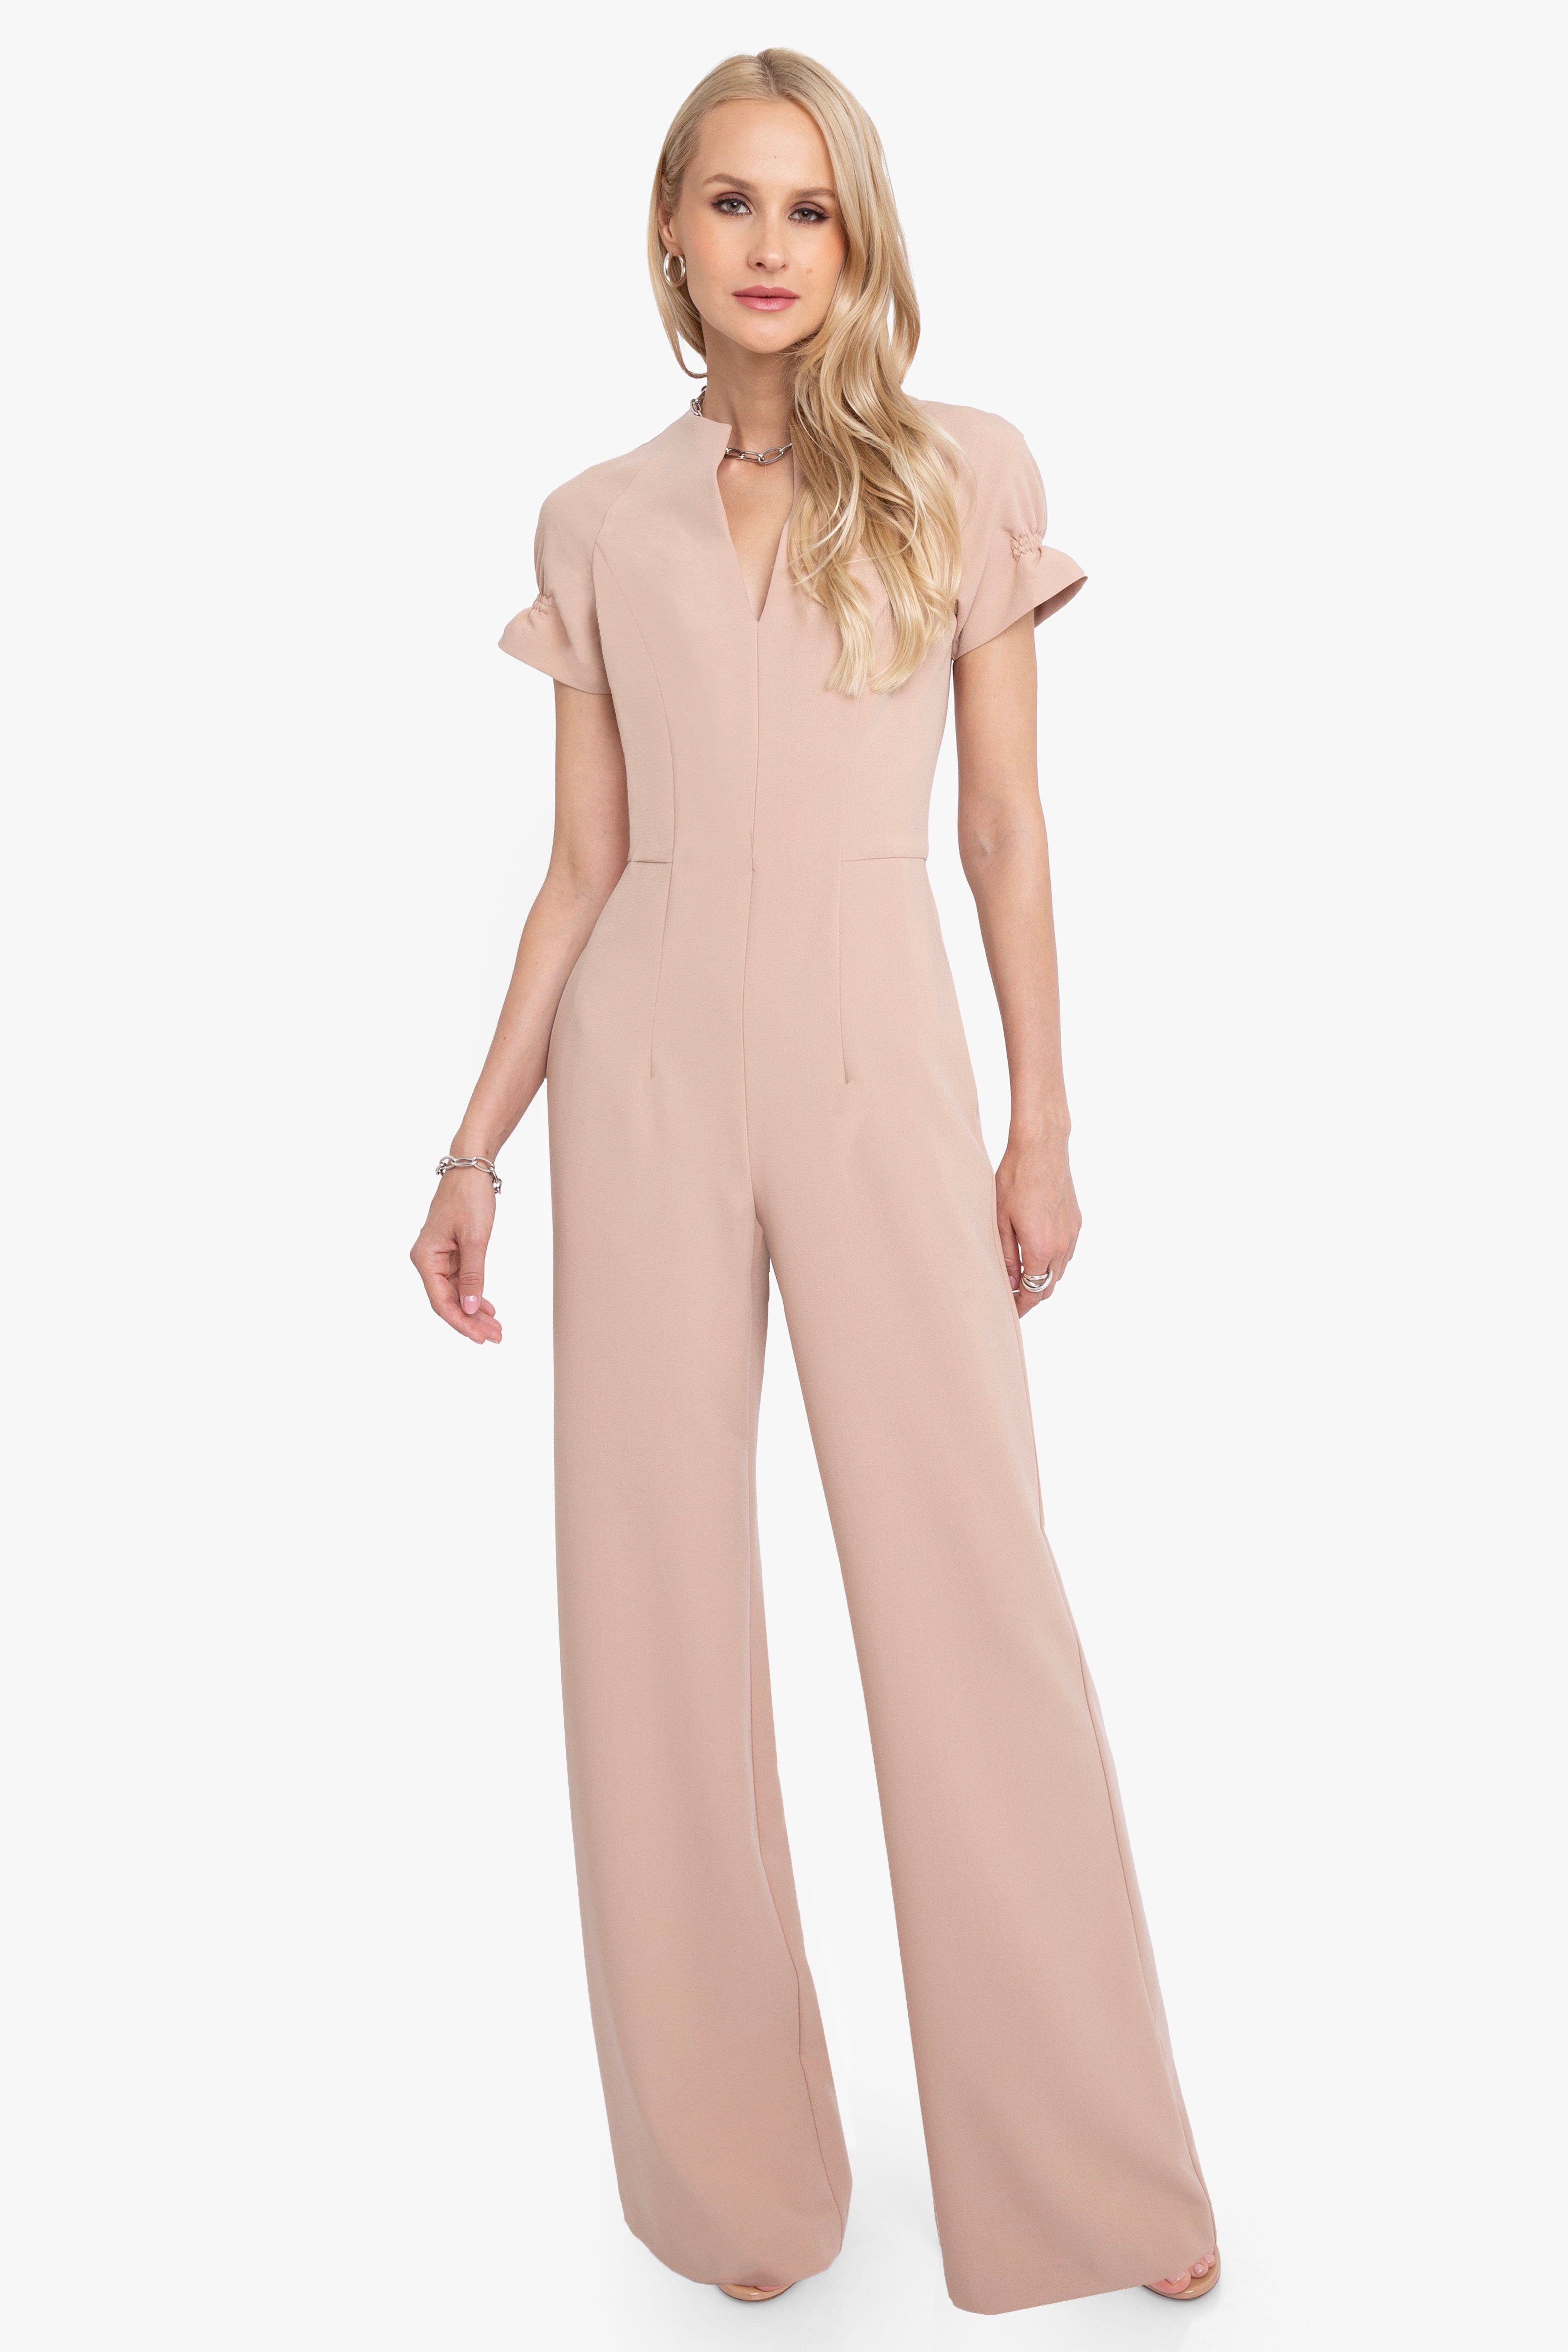 Sedona Dolman Sleeve Jumpsuit | Made Trade | Jumpsuit with sleeves, Ethical  clothing, Jumpsuit